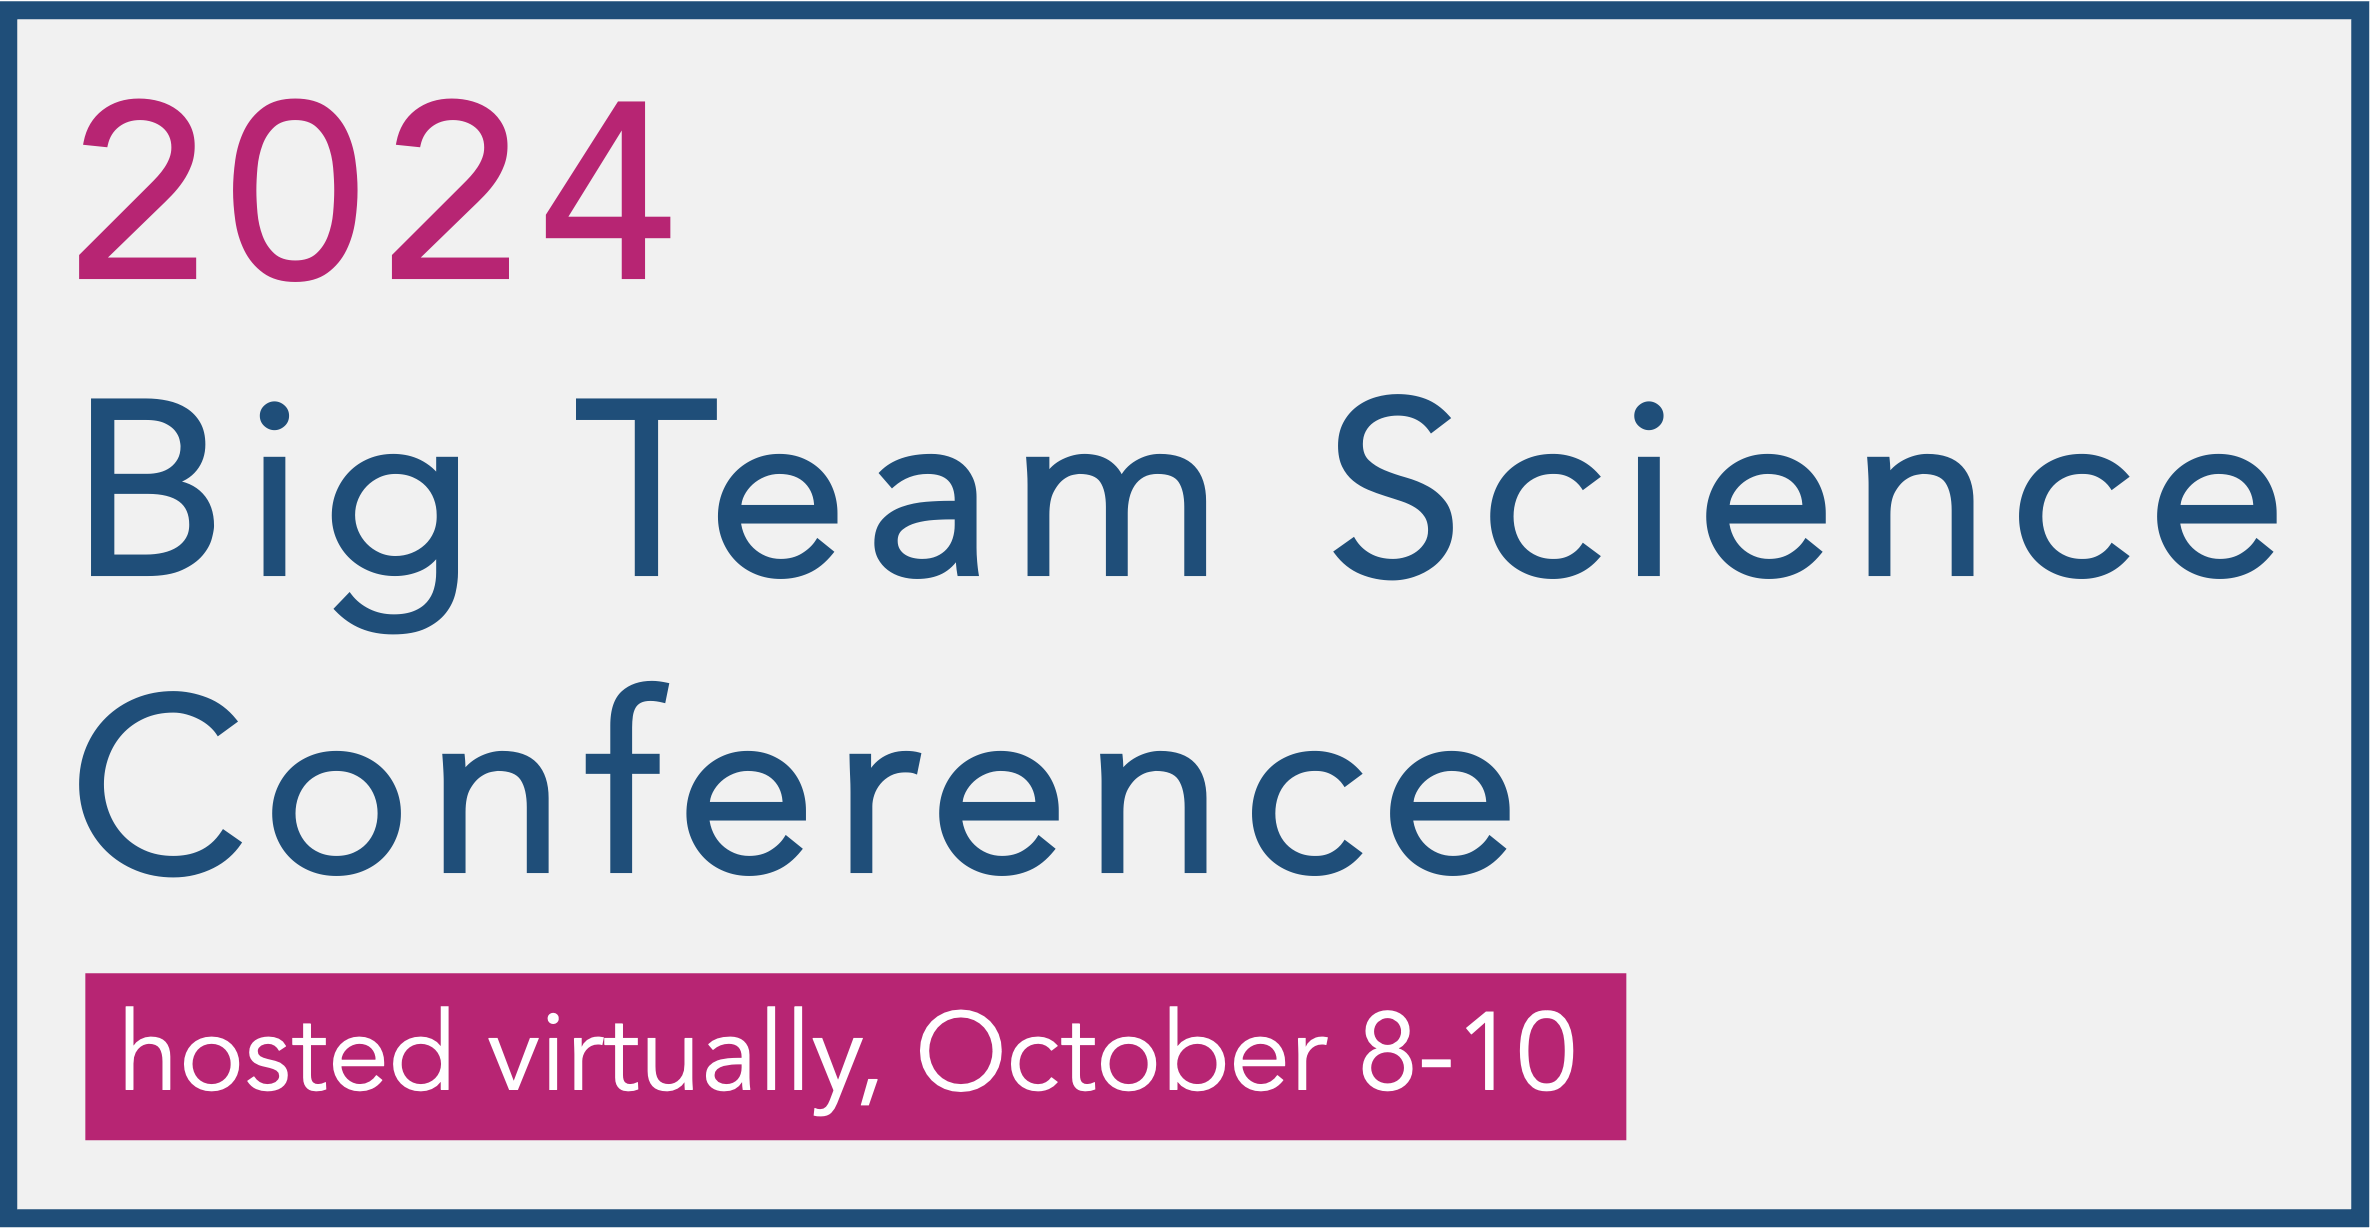 2024 Big Team Science Conference, hosted virtually October 8-10